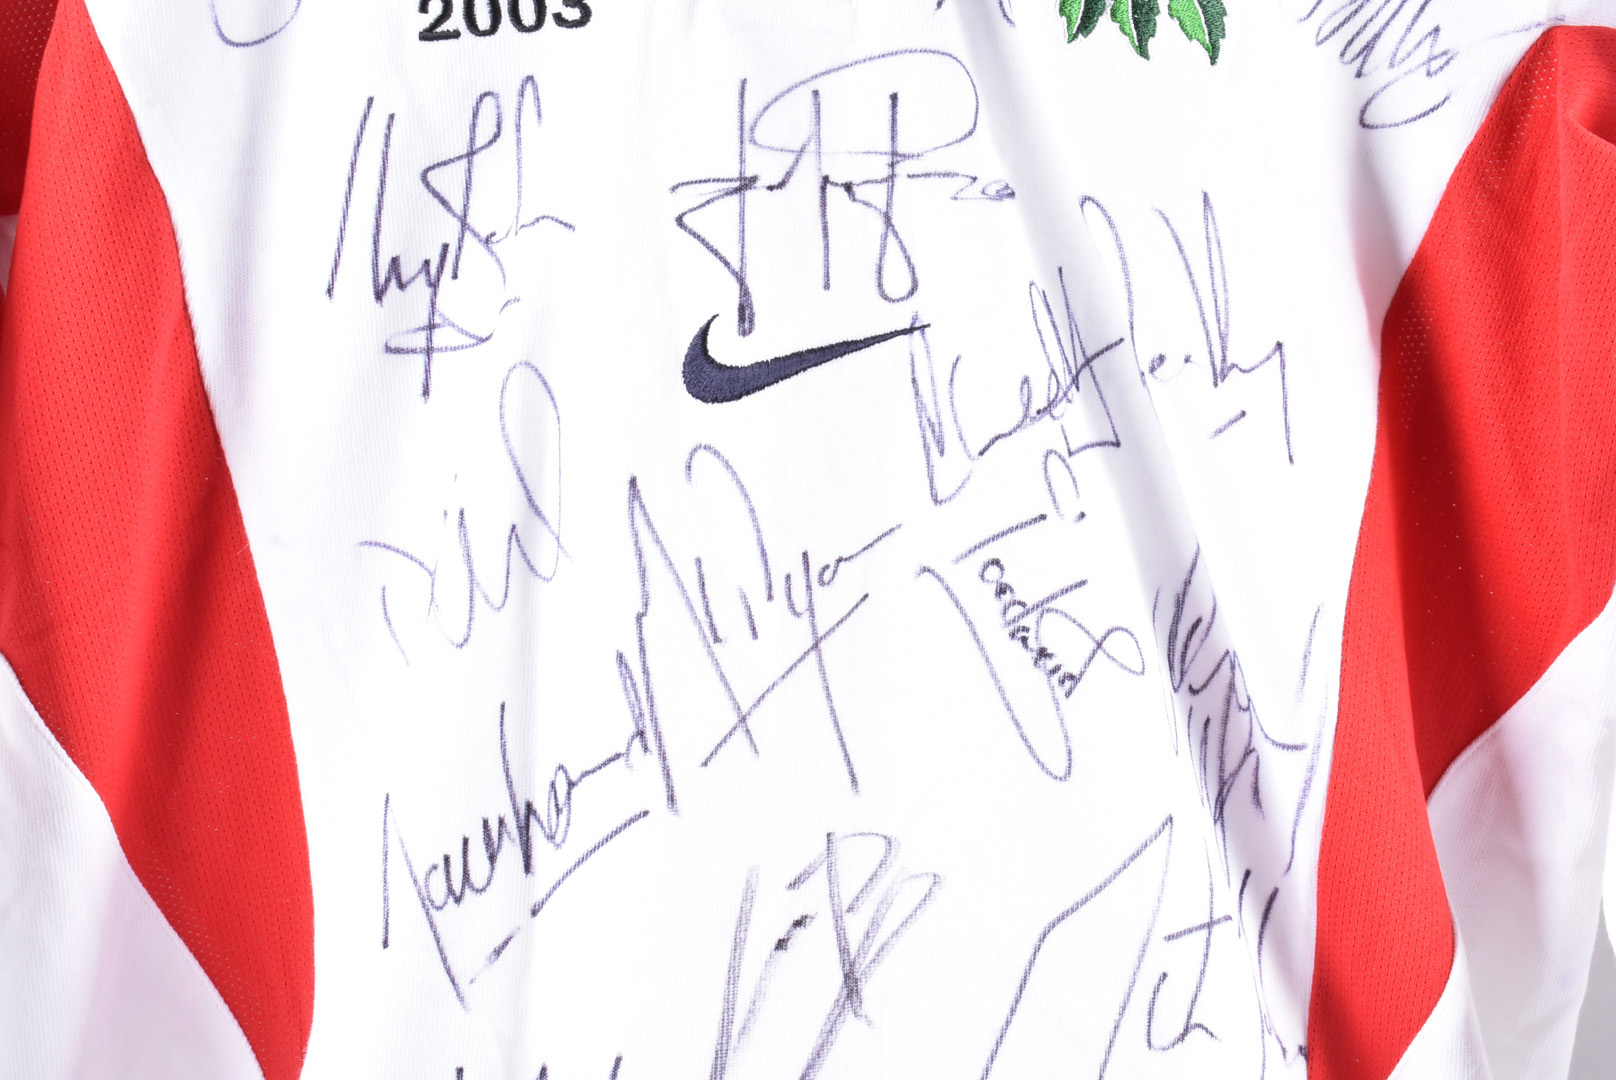 England 2003 Rugby World Cup Winners signed shirt, comprising are Iain Balshaw, Ben Cohen, Josh - Image 3 of 4